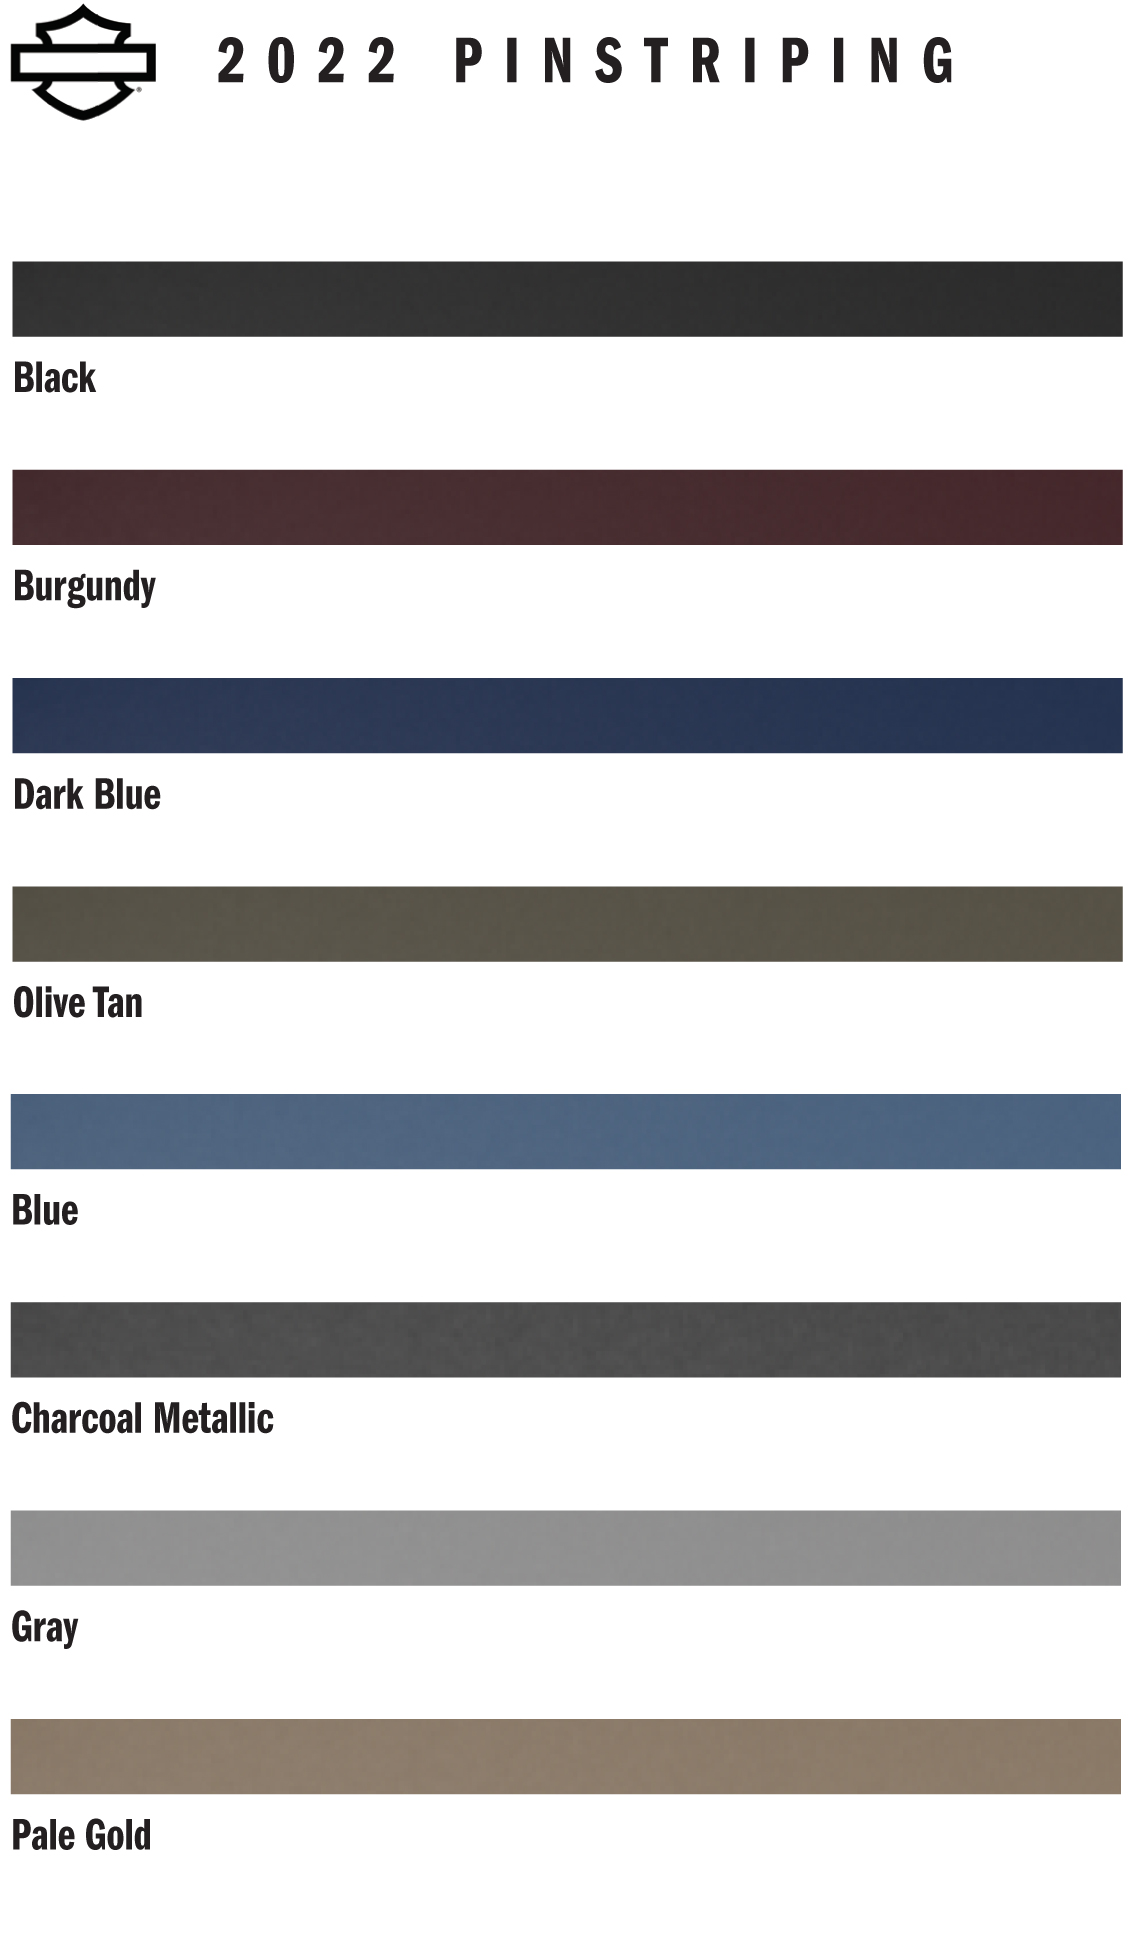 H-D Pin striping color selection